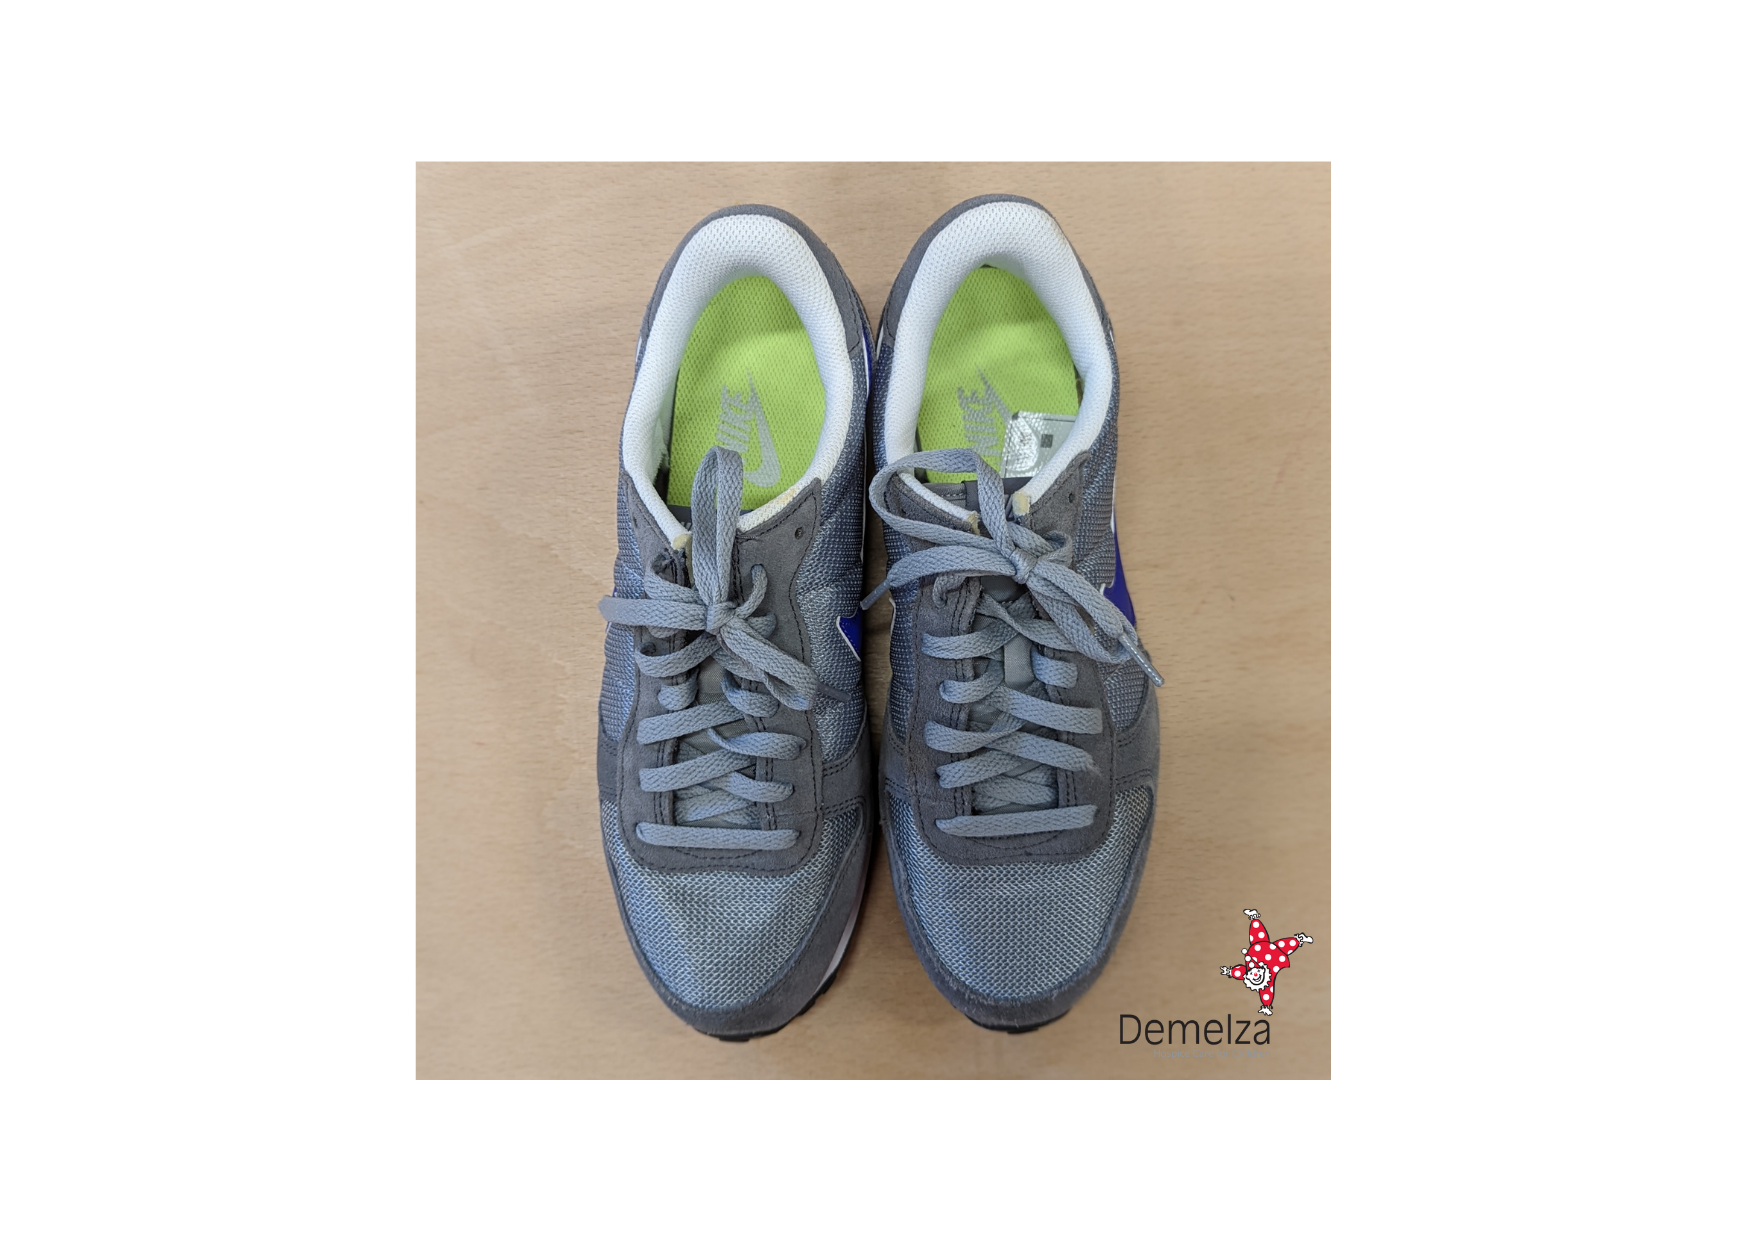 Green and Grey Nike Genicco running shoes - Top View